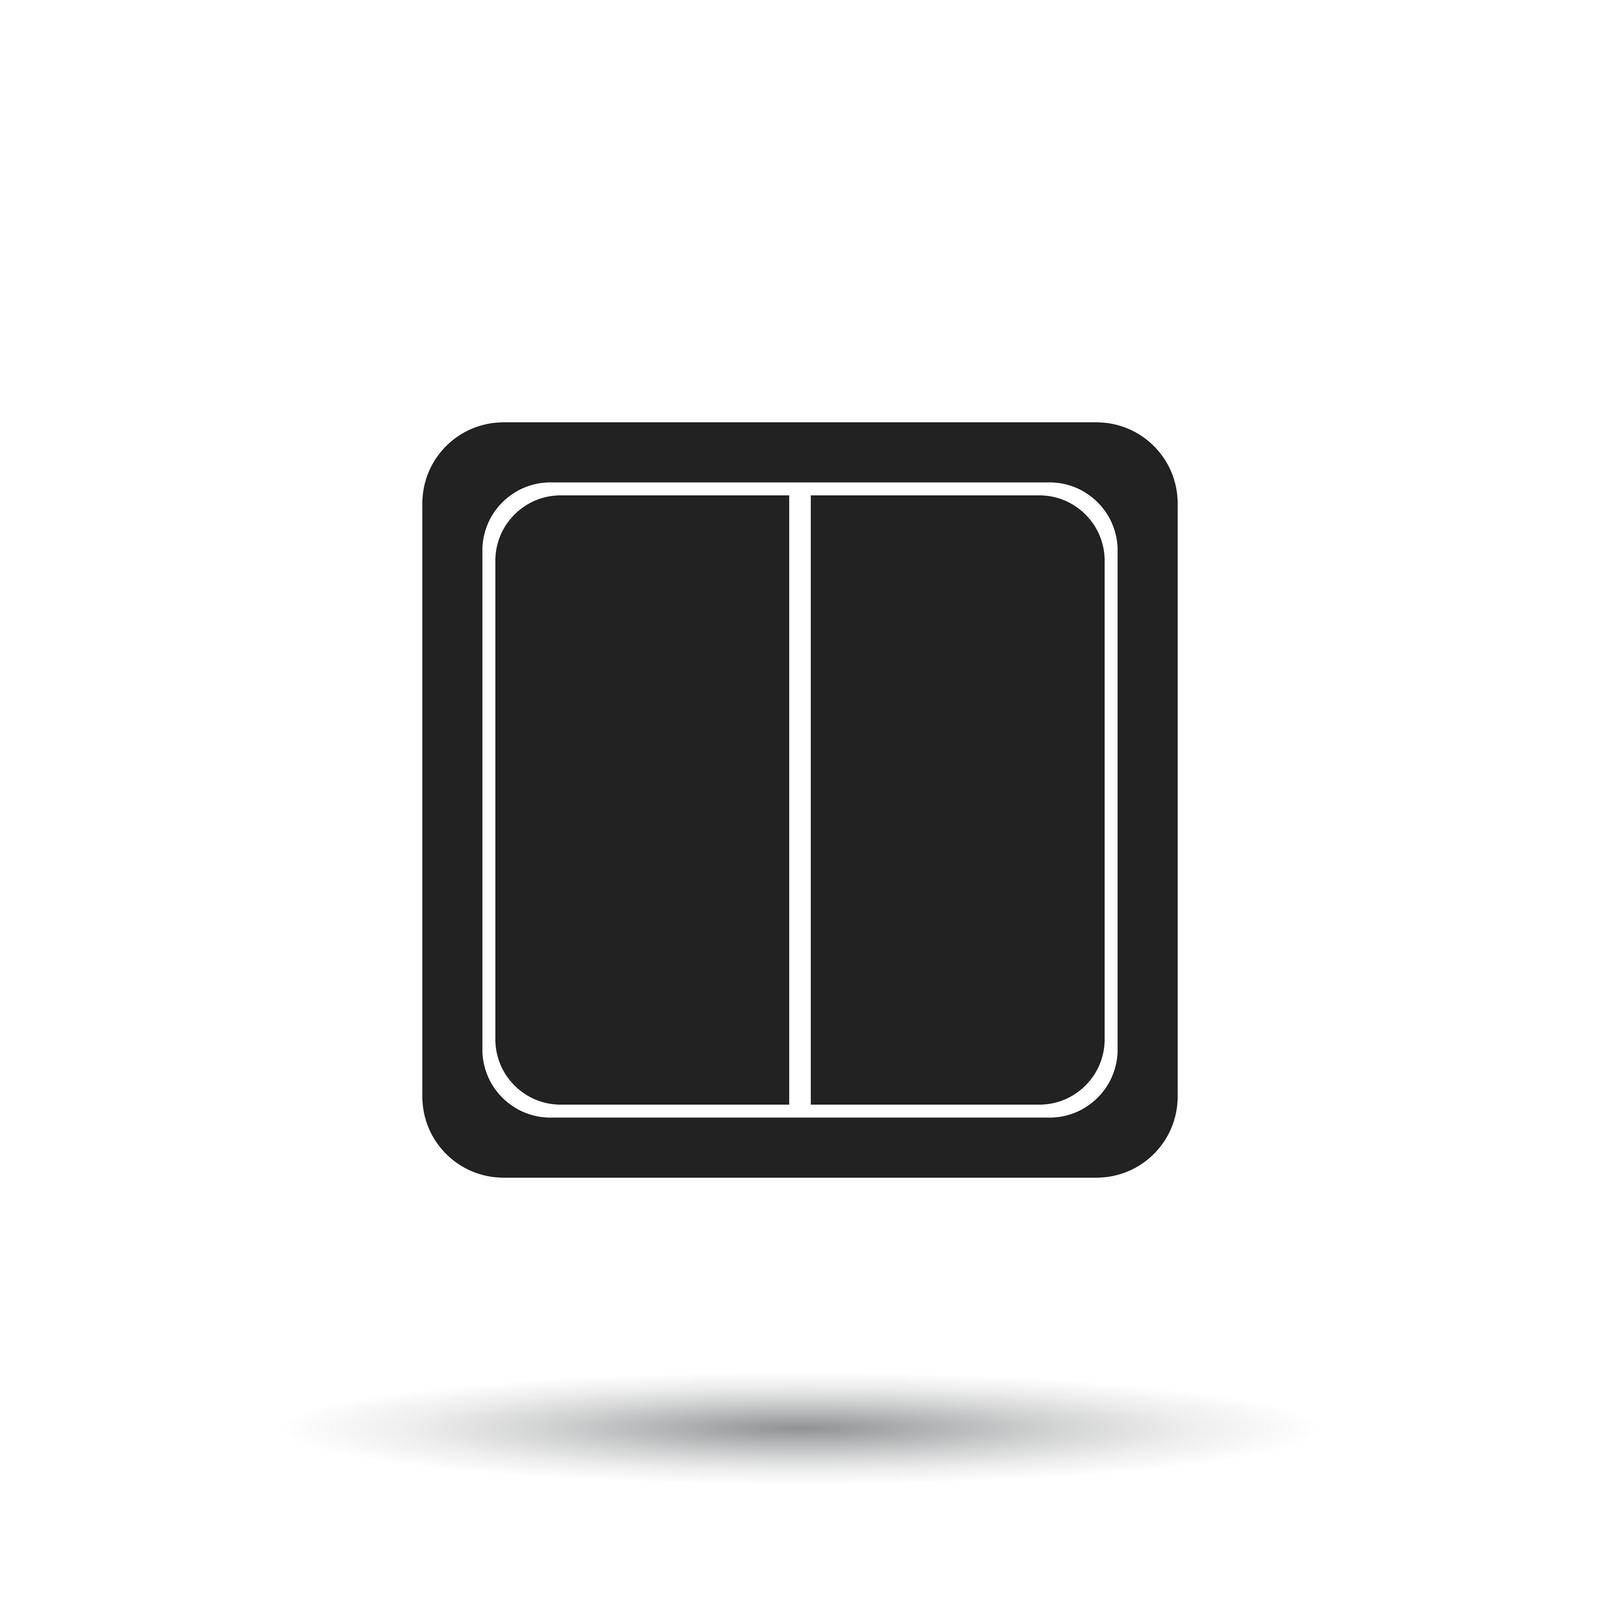 Electric light switch icon. Electric switch flat vector illustration on white background.